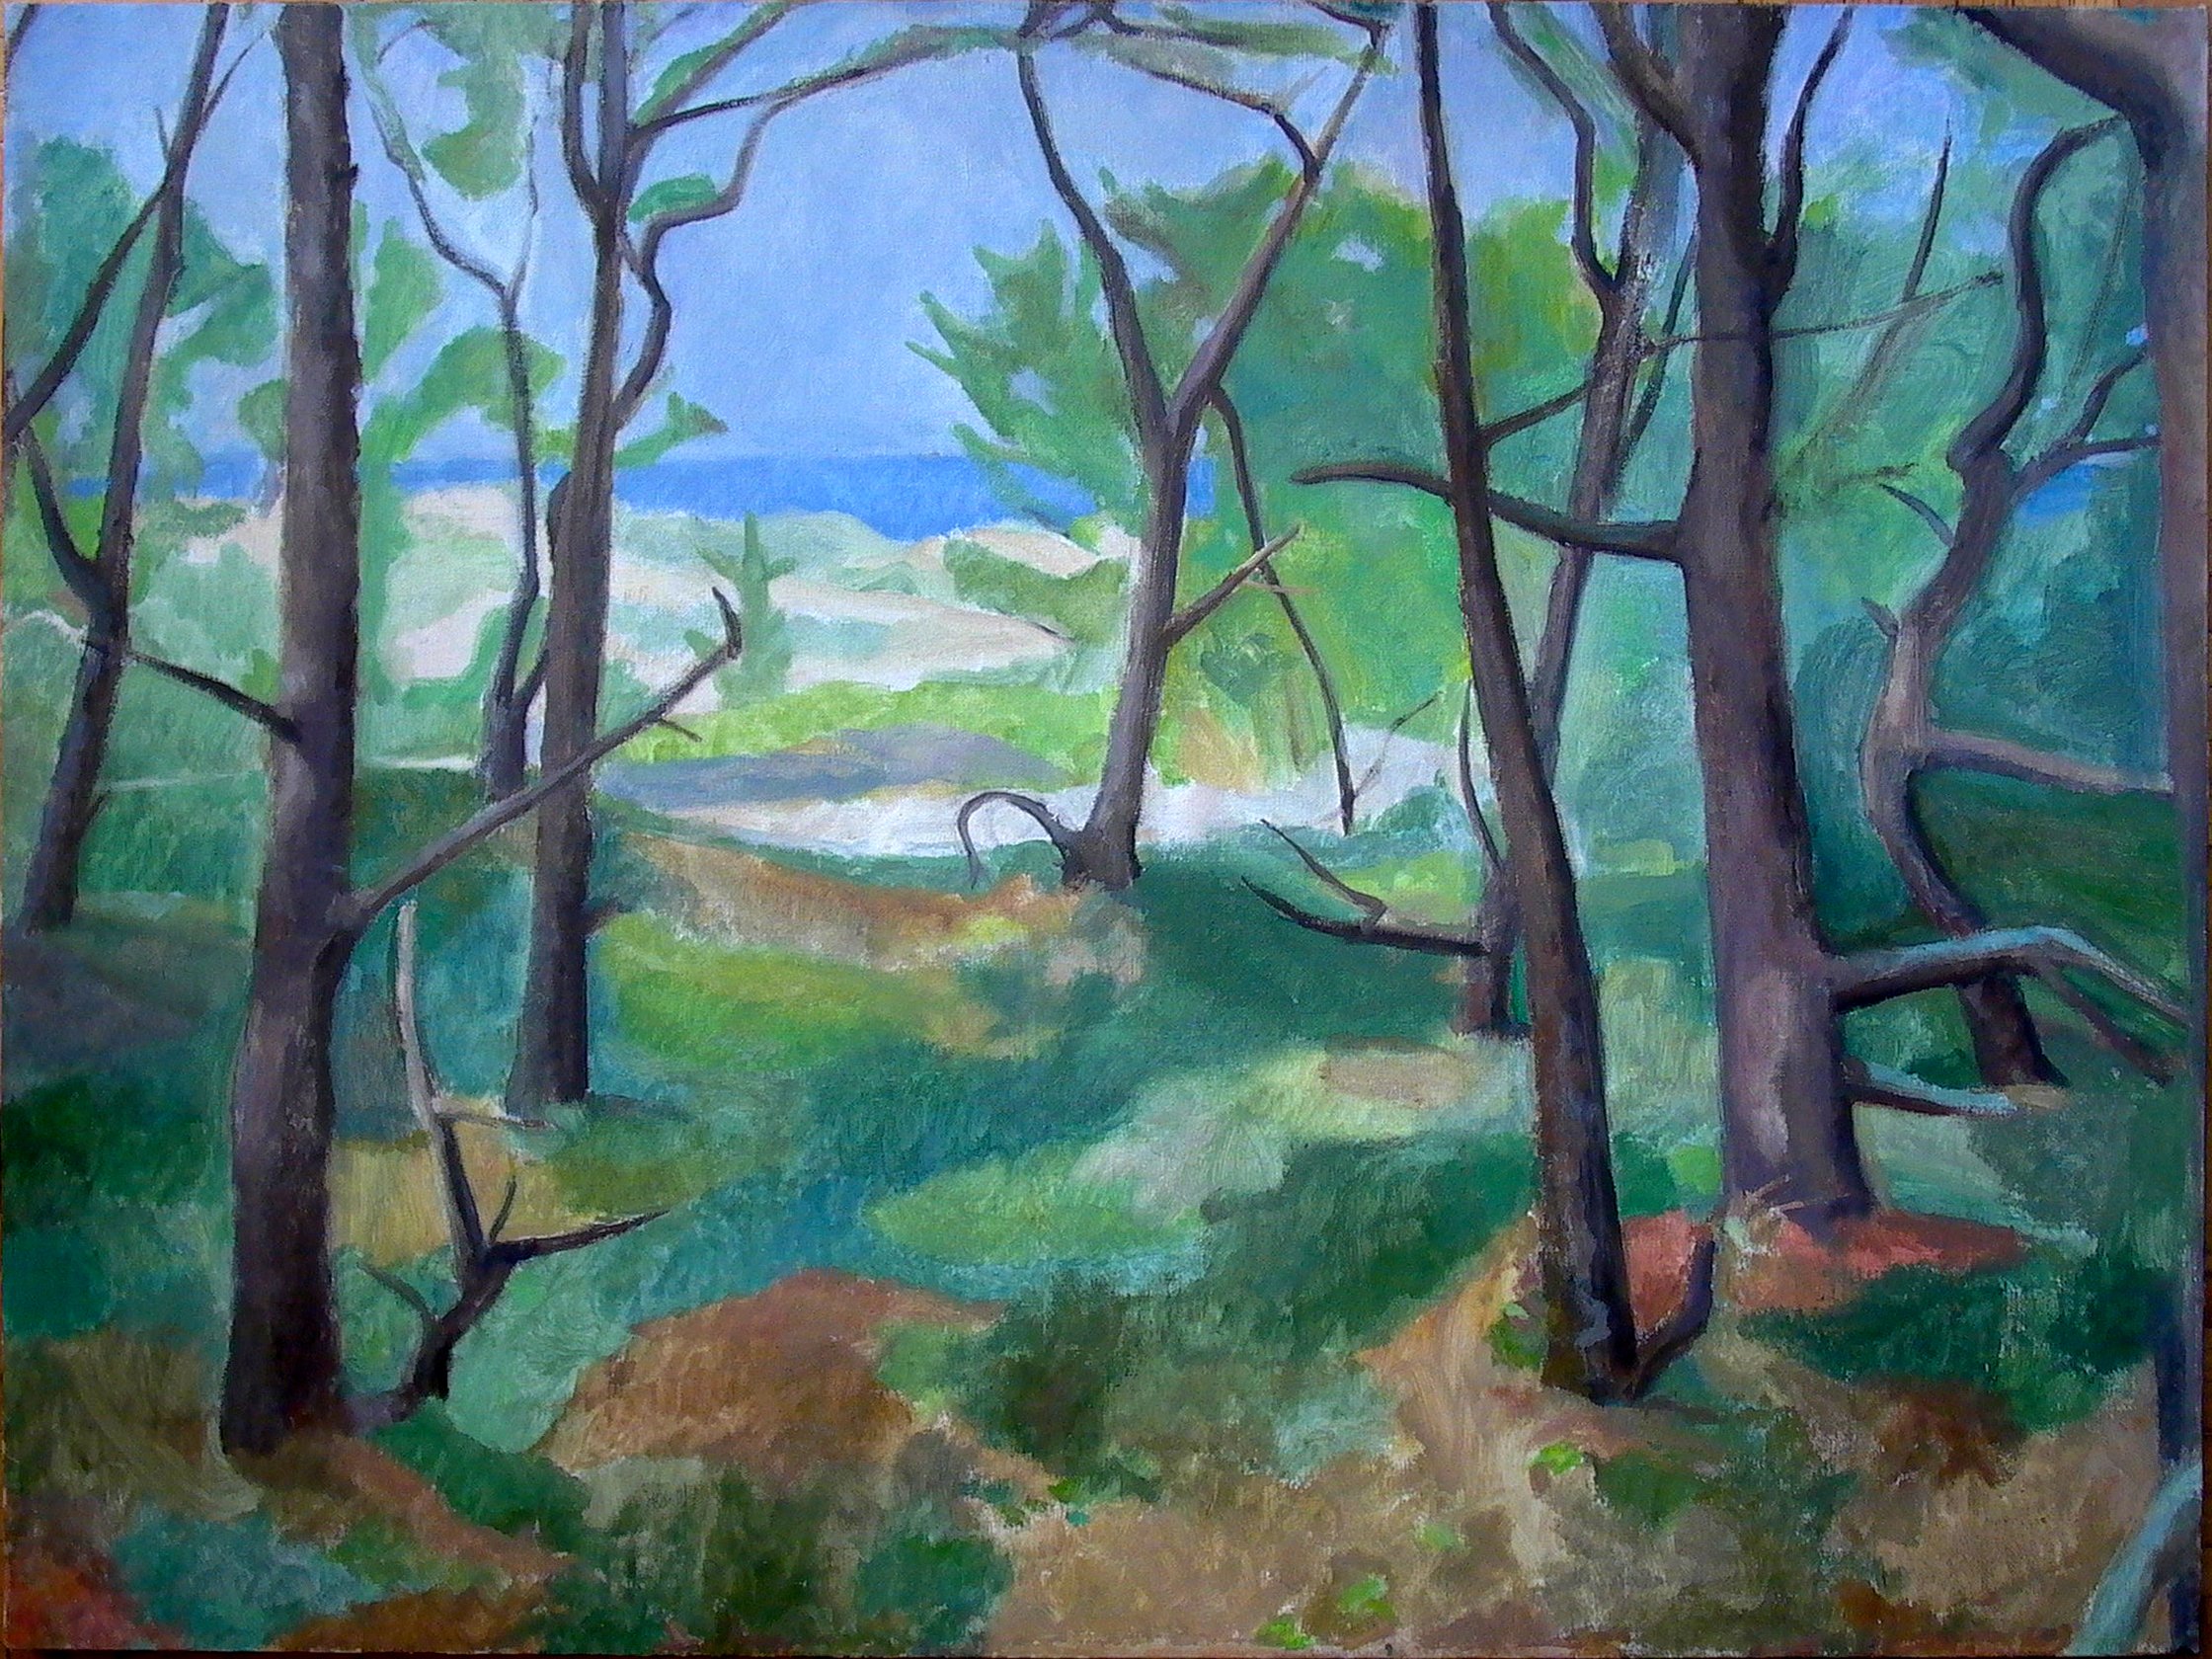 Stunted Pines, Cape Cod, MA, 26 x 34 inches, oil on linen, 2004